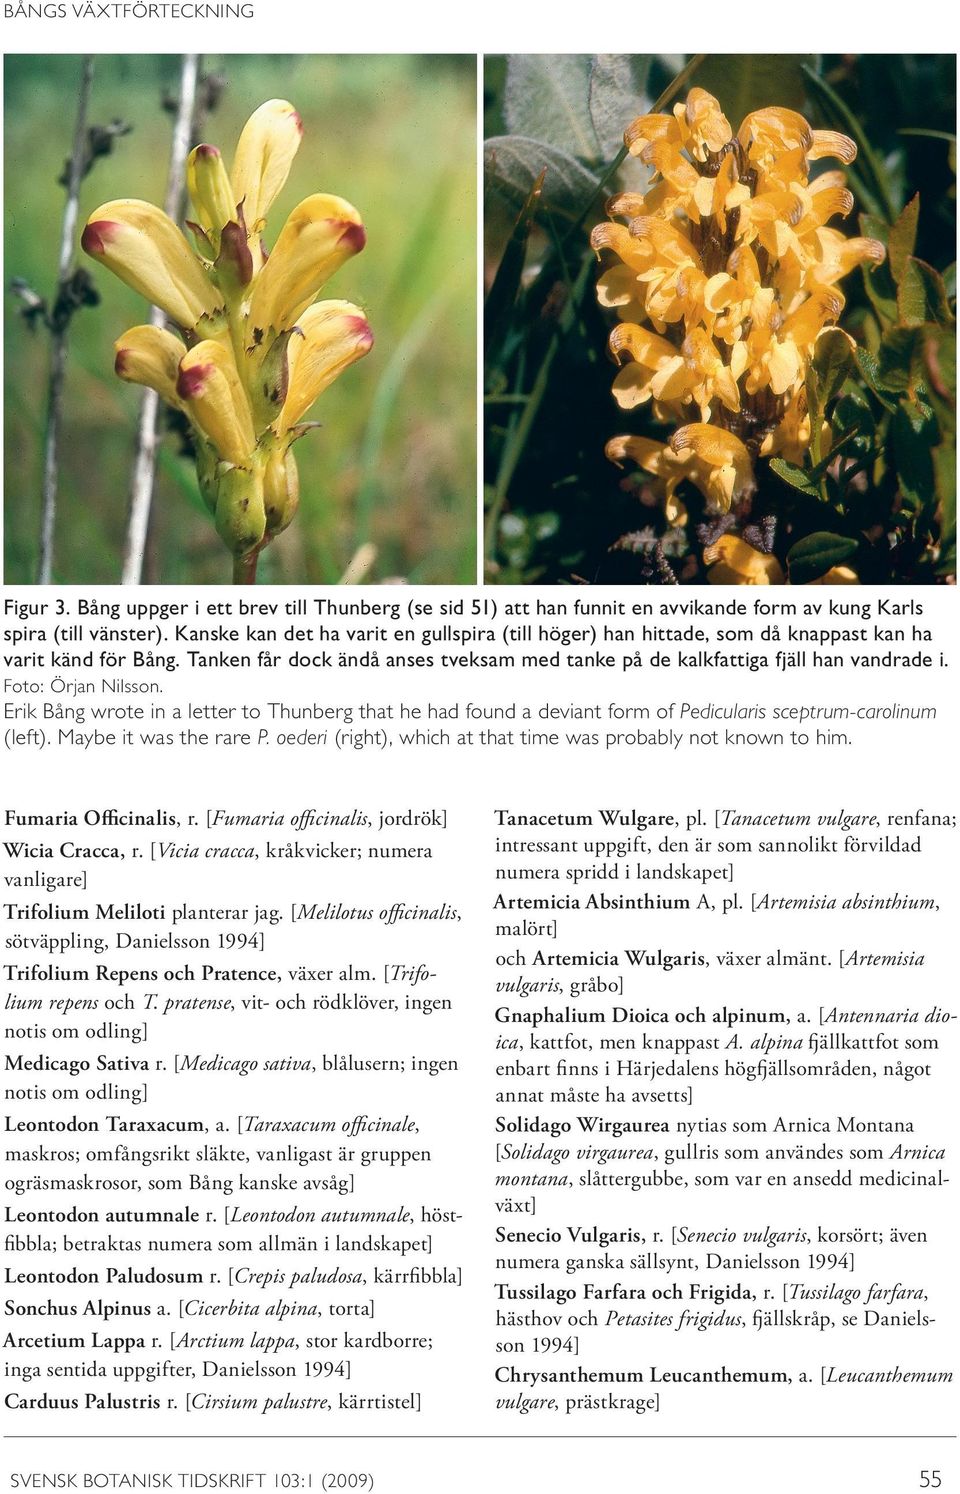 Foto: Örjan Nilsson. Erik Bång wrote in a letter to Thunberg that he had found a deviant form of Pedicularis sceptrum-carolinum (left). Maybe it was the rare P.